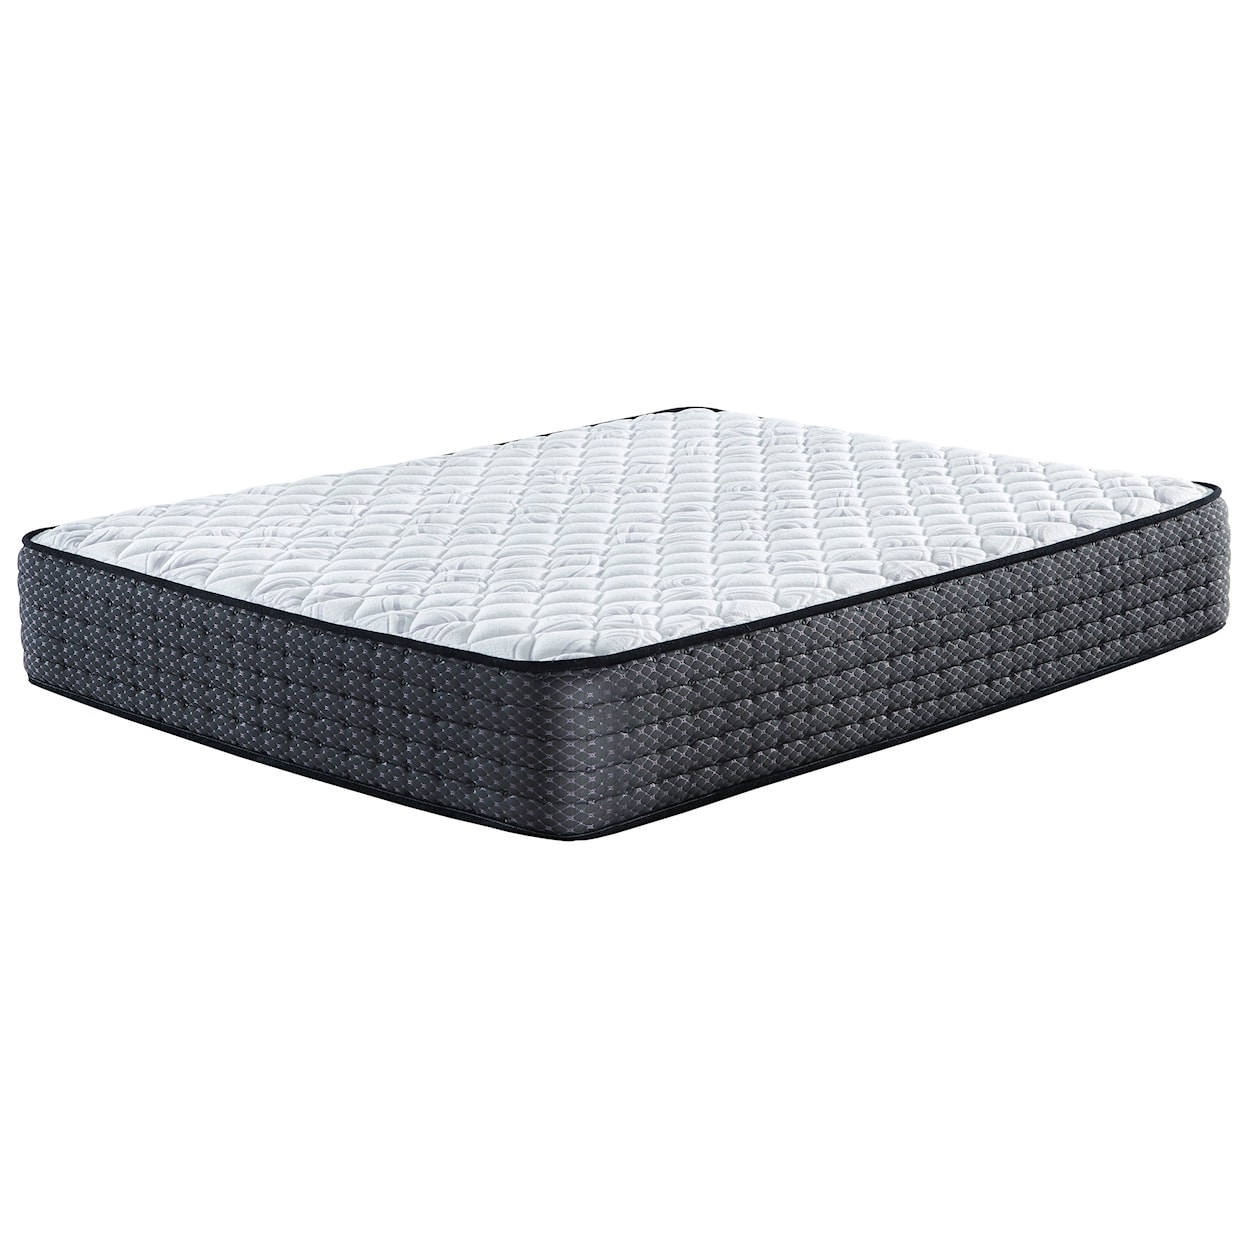 Sierra Sleep M625 Limited Edition Firm Full 13" Firm Mattress and Foundation